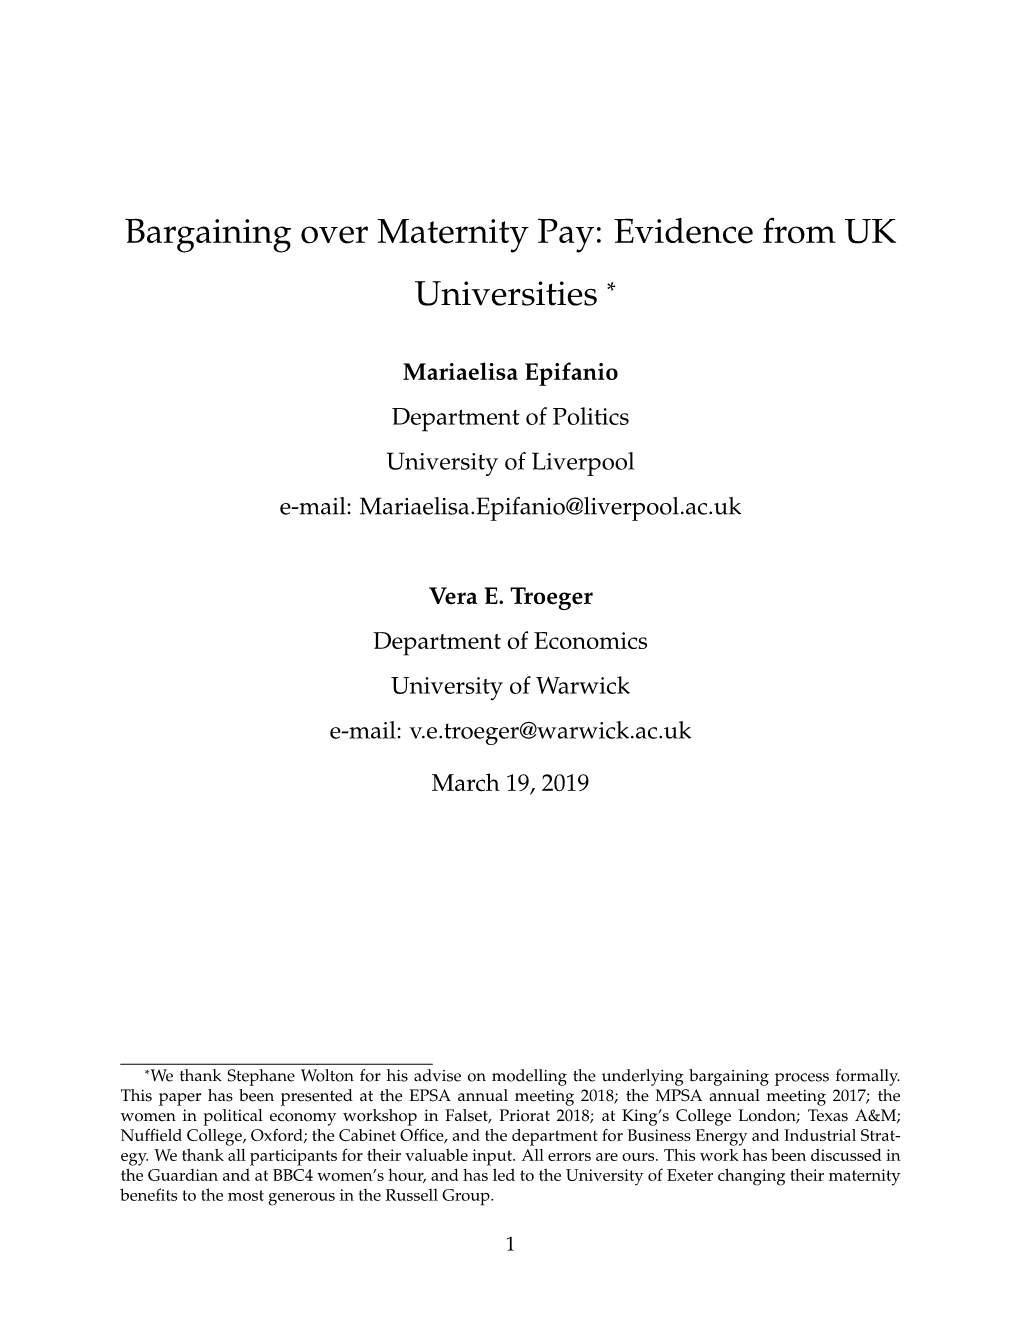 Bargaining Over Maternity Pay: Evidence from UK Universities *